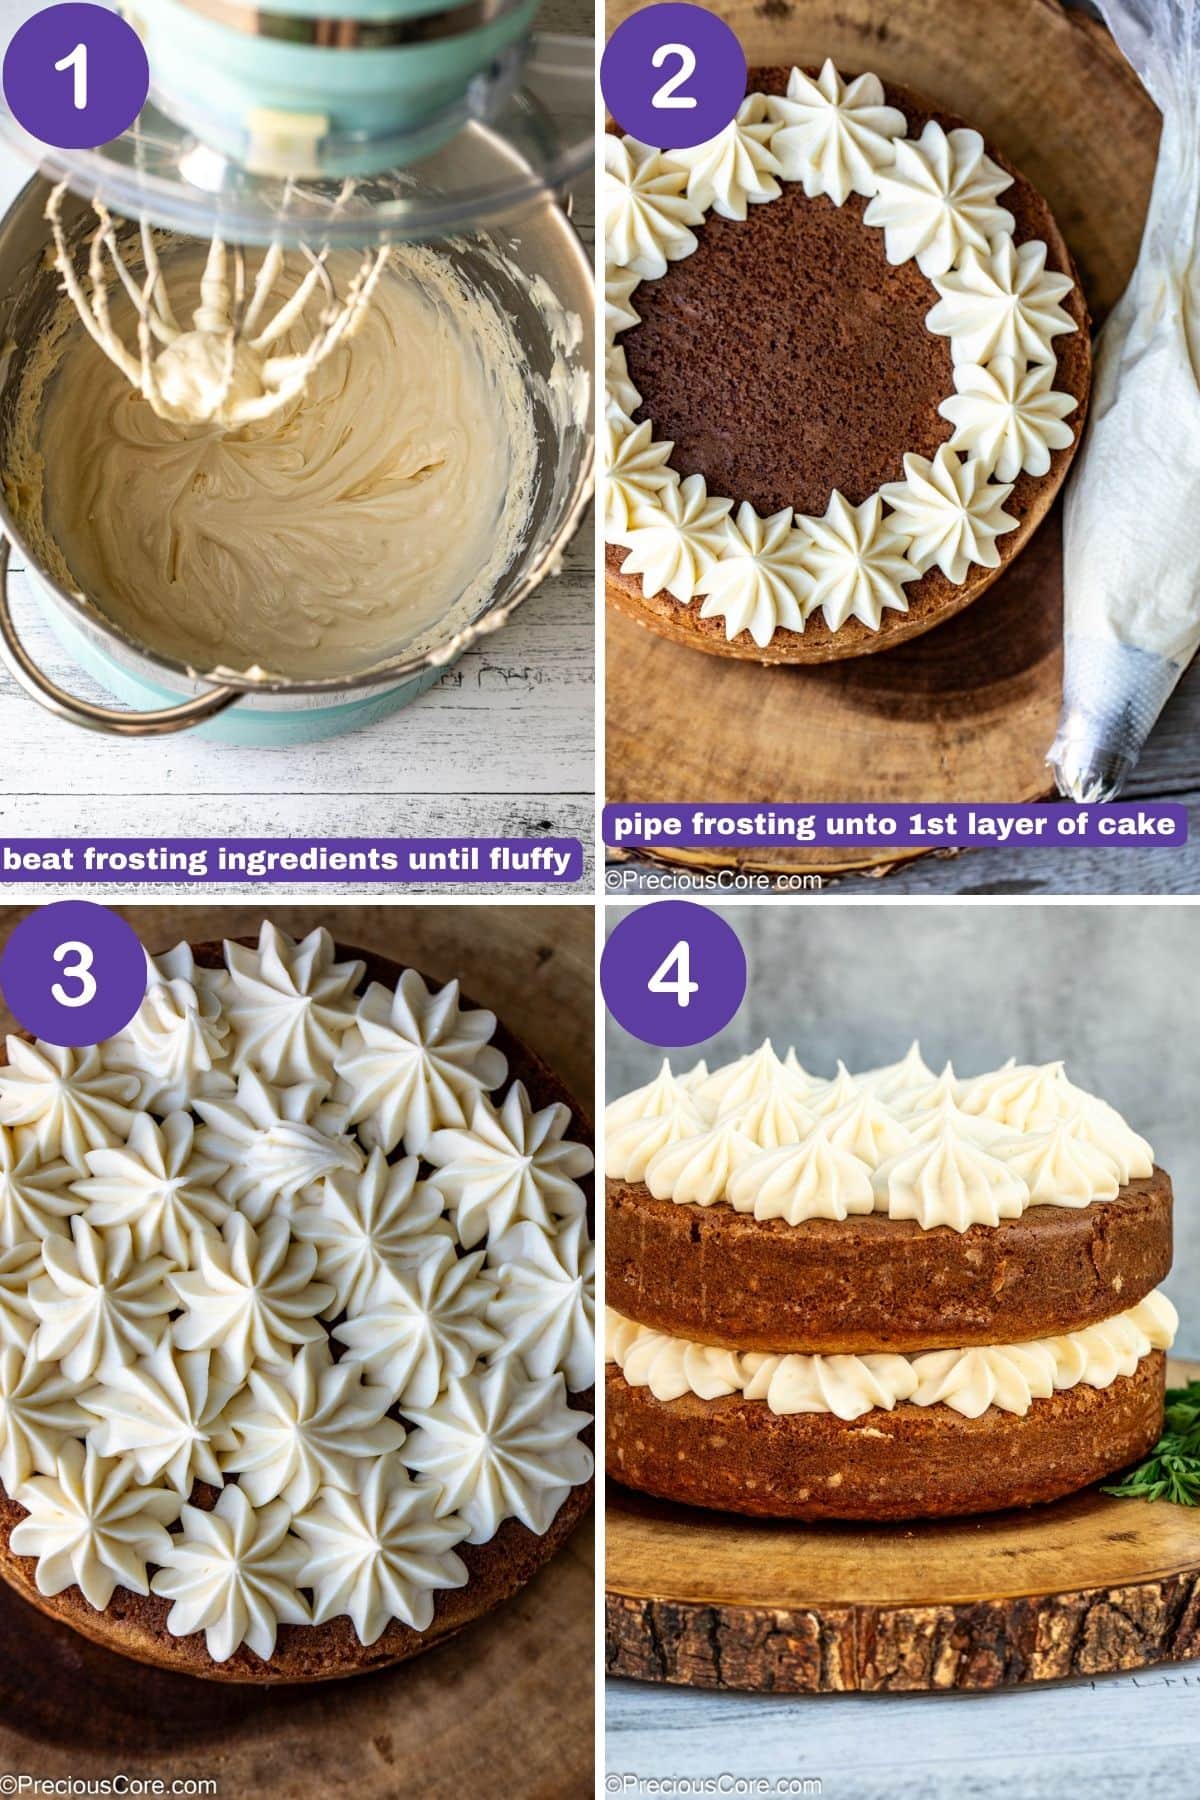 Steps for frosting an old fashioned carrot cake.